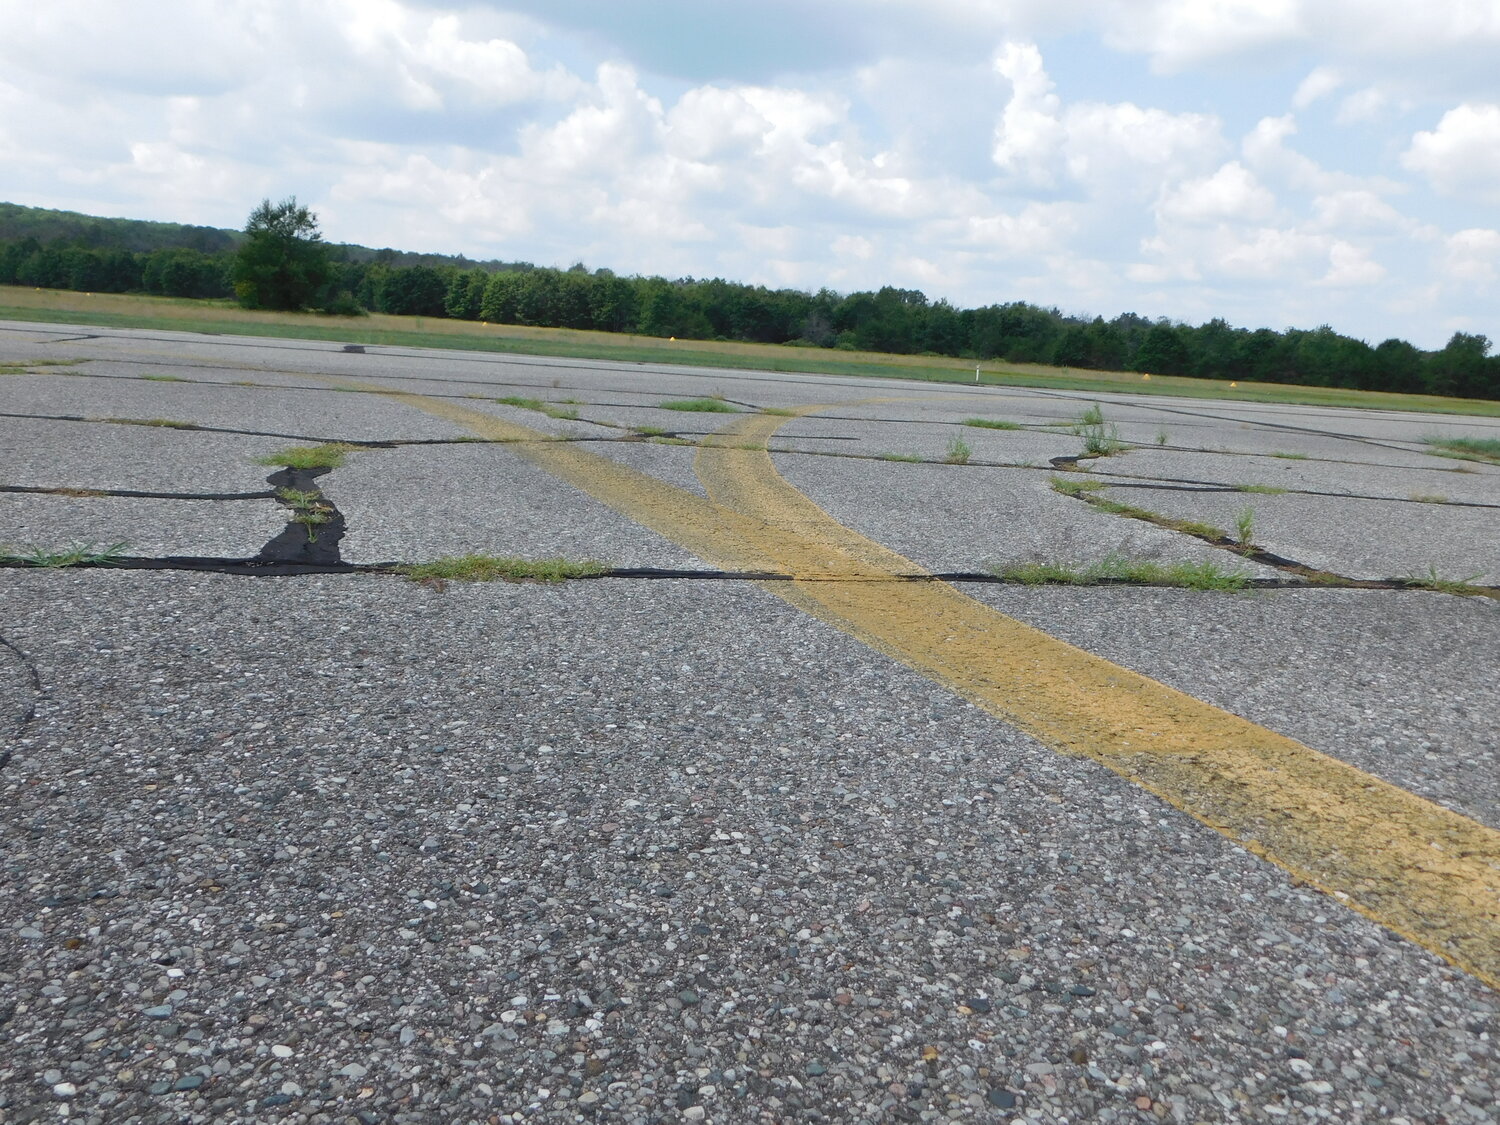 These cracks show some of the major weed growth that had to be eliminated before the upcoming crack sealing work could be undertaken.